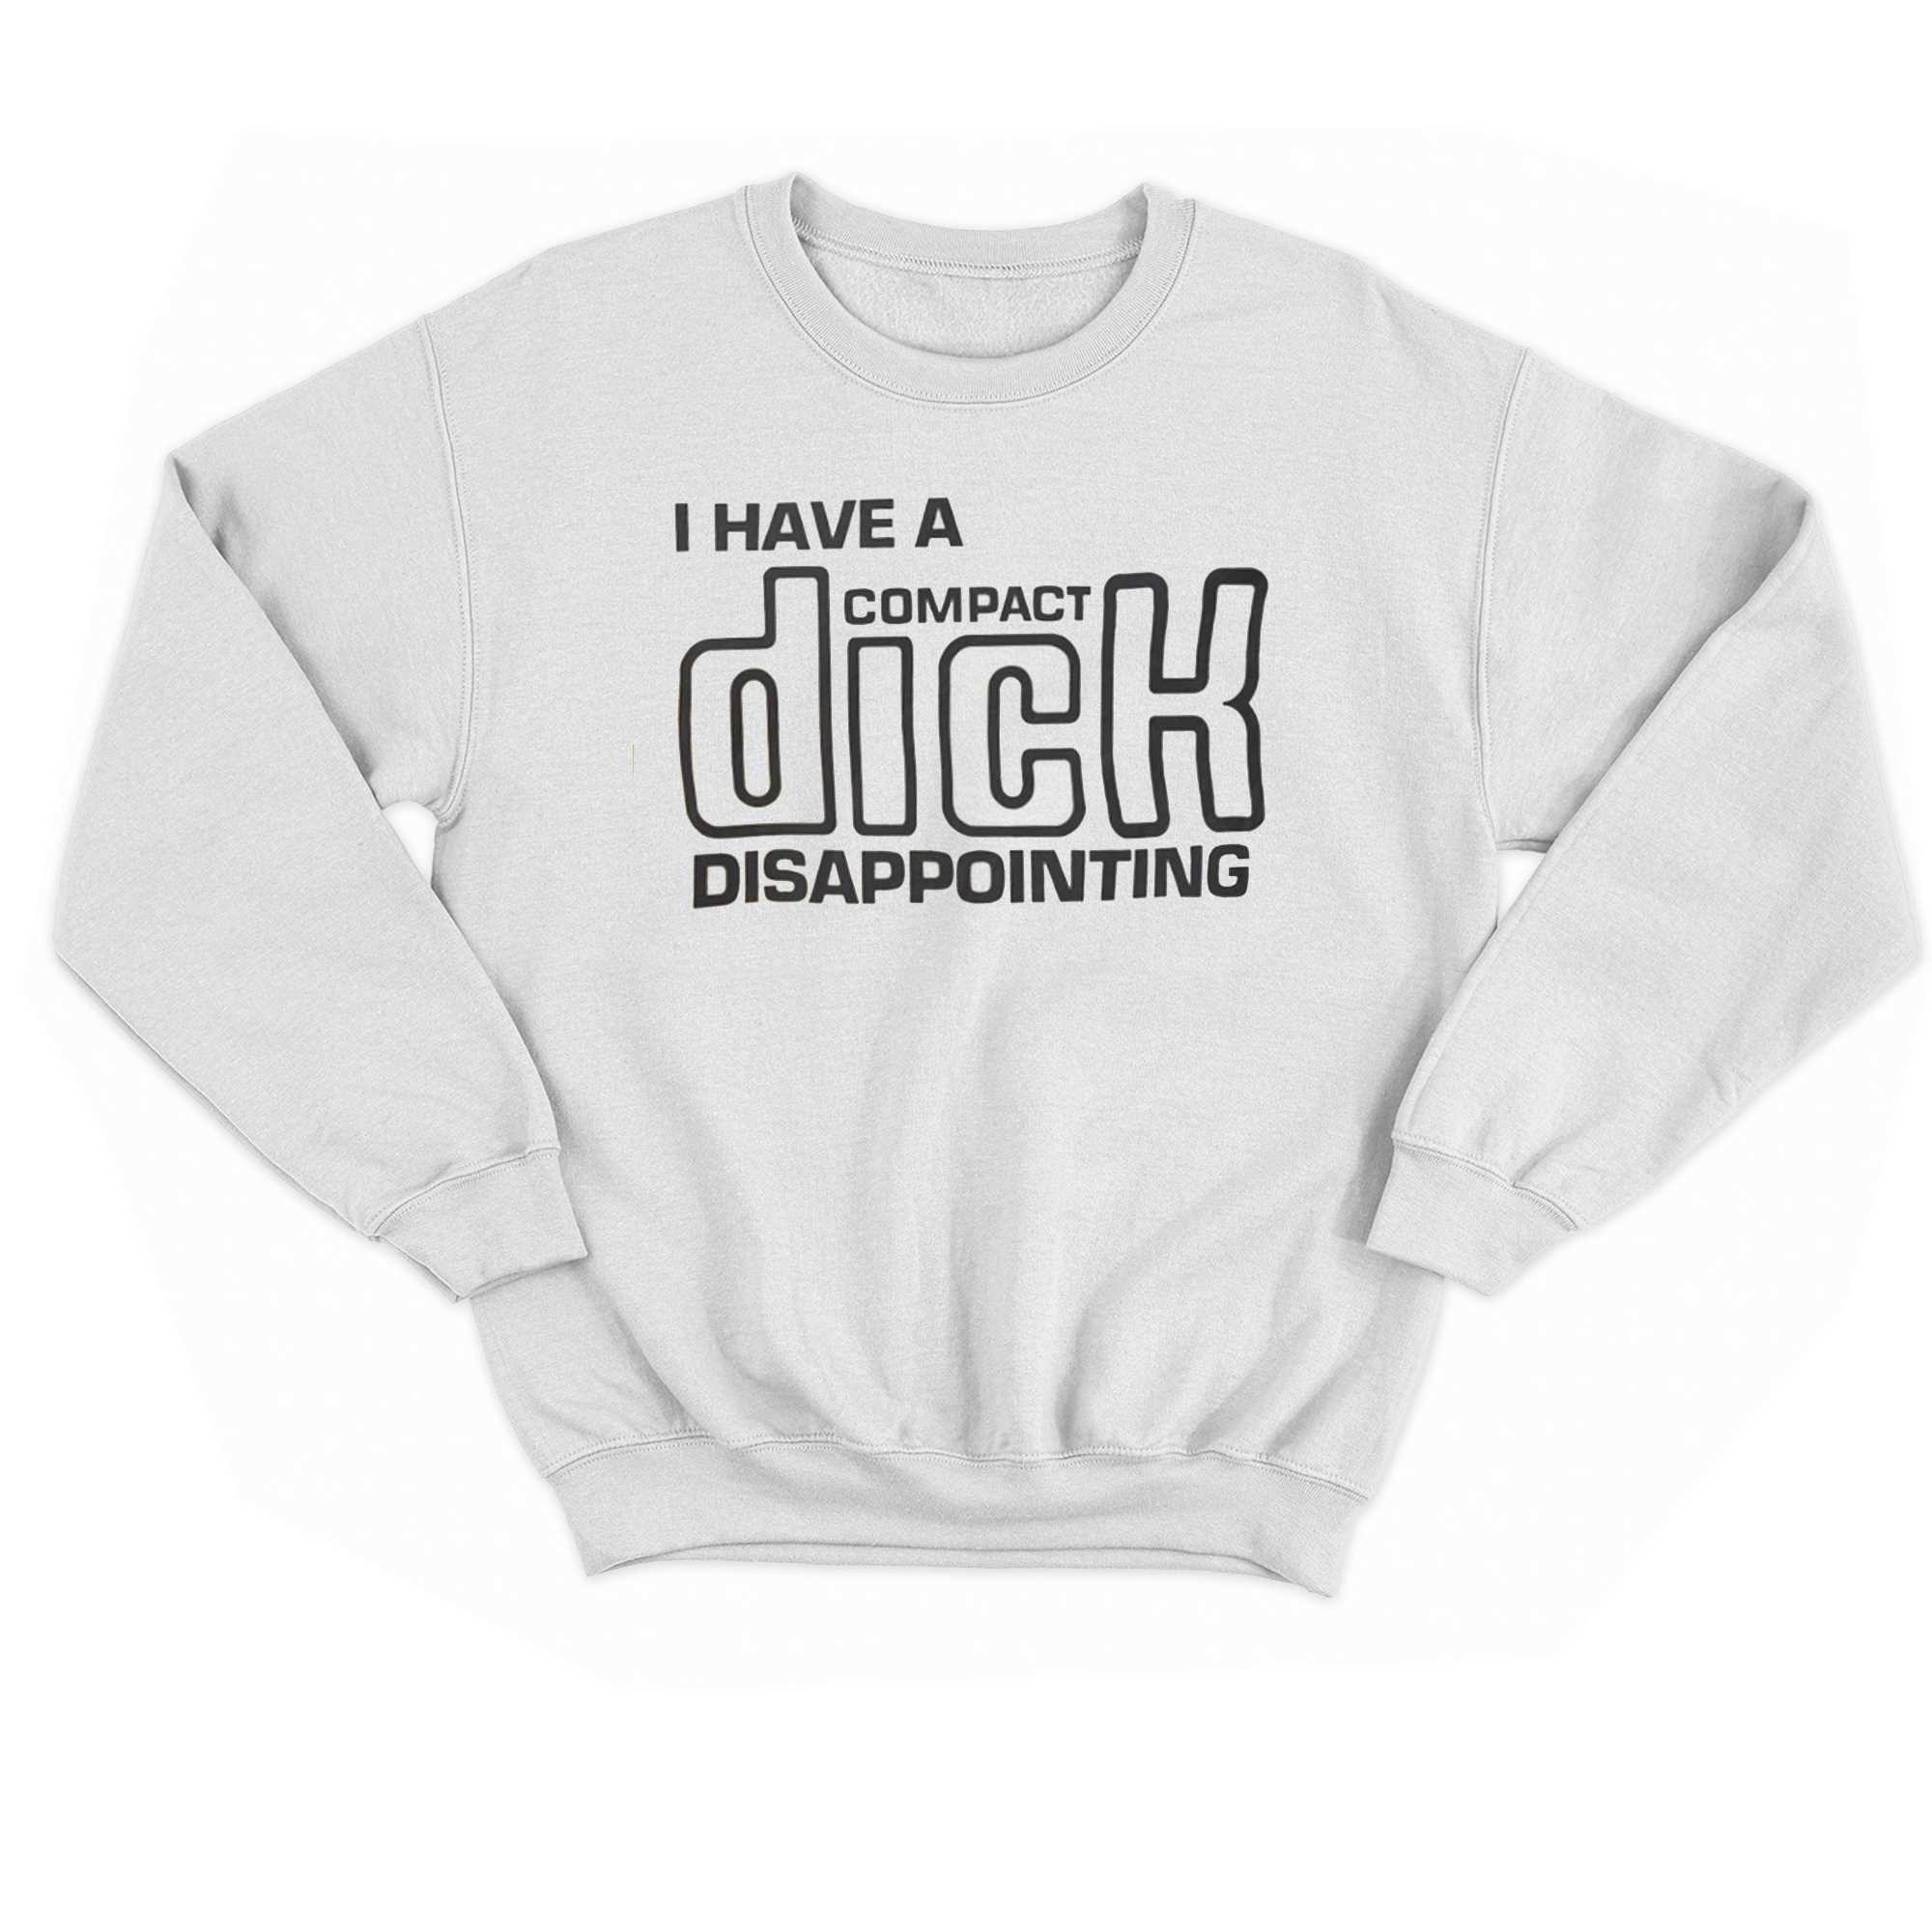 I Have A Compact Dick T-shirt 